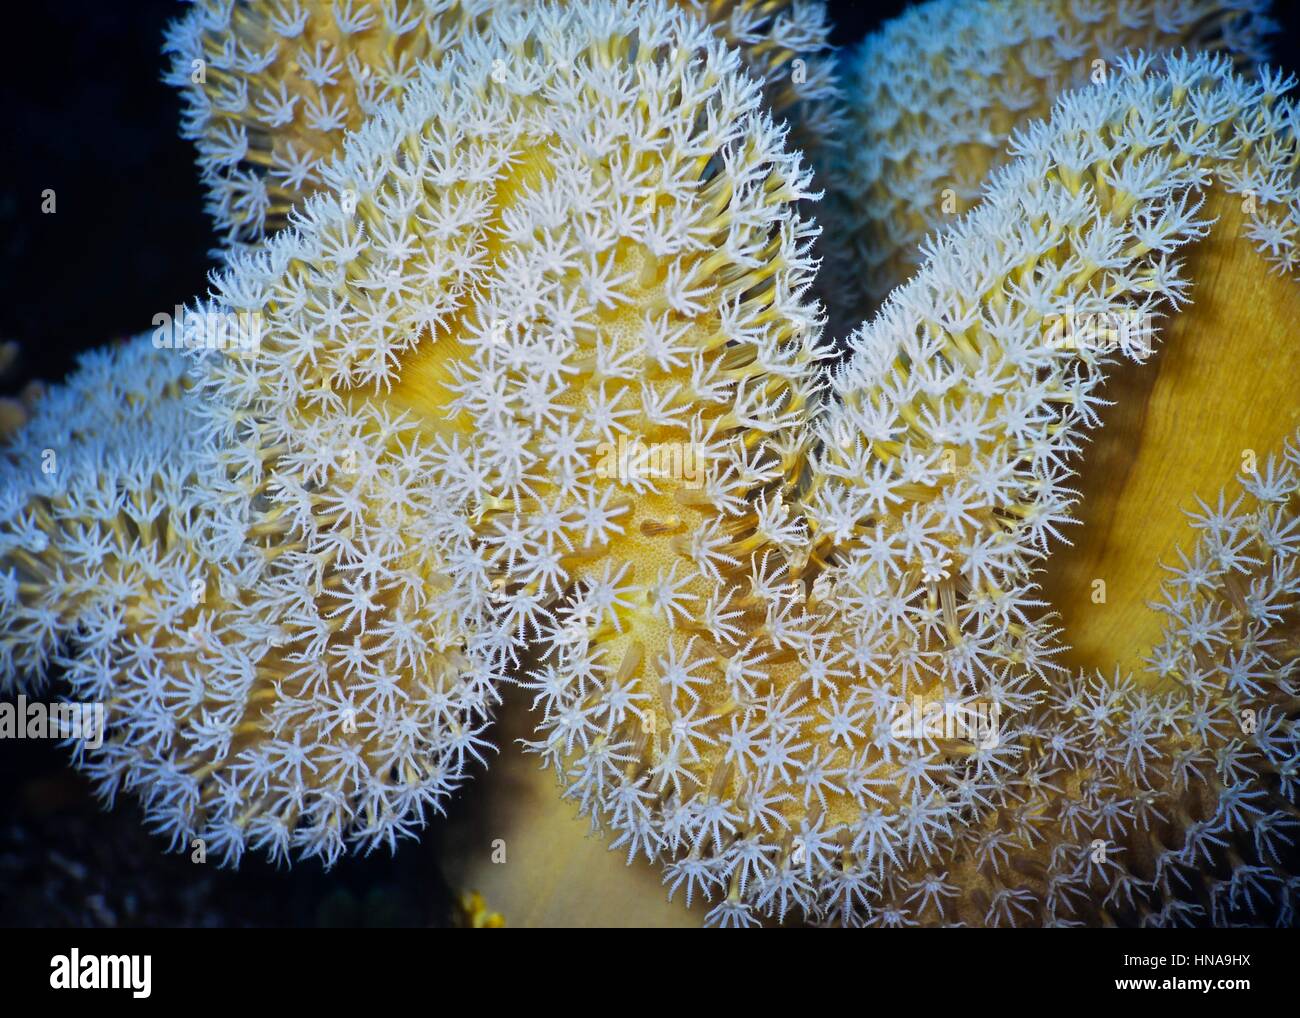 A leather coral (Sarcophyton elegans) with its many eight tentacle polyps extended and feeding in the current. Photographed in the Egyptian Red Sea. Stock Photo